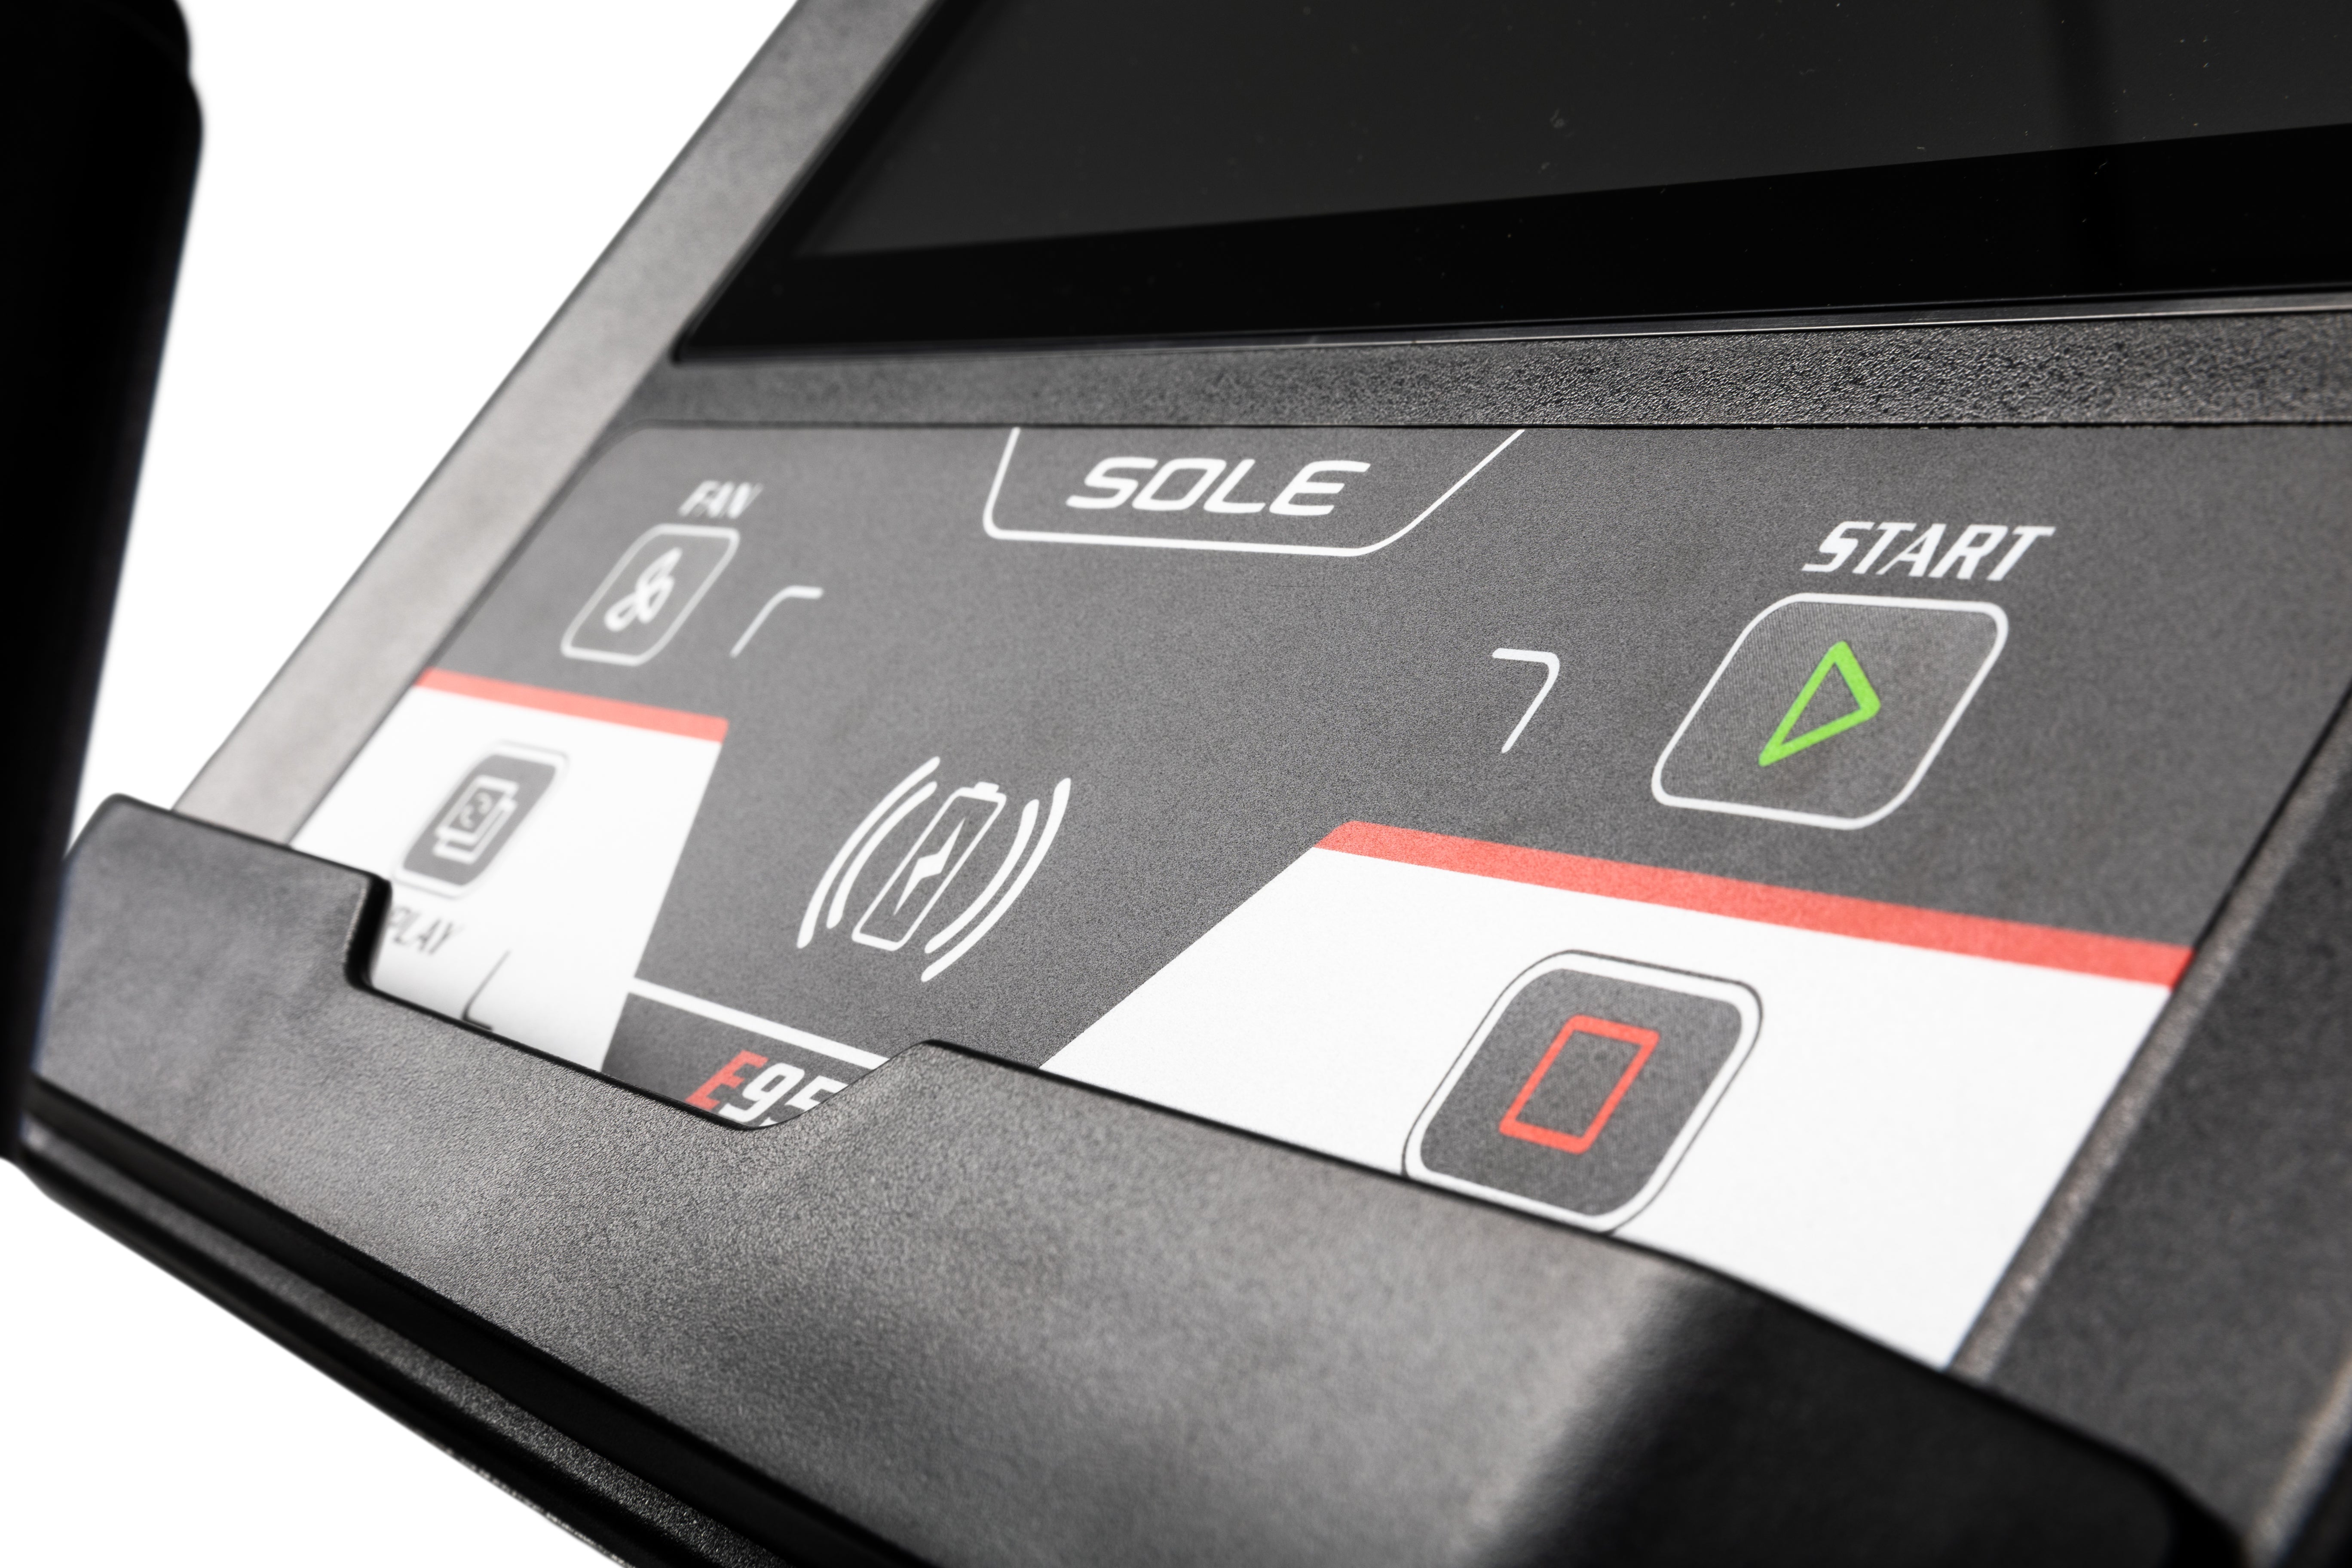 Detail shot of the Sole E95 elliptical machine's control panel, highlighting the SOLE logo, various button icons including fan and volume, and tactile buttons labeled 'START' and a stop symbol.